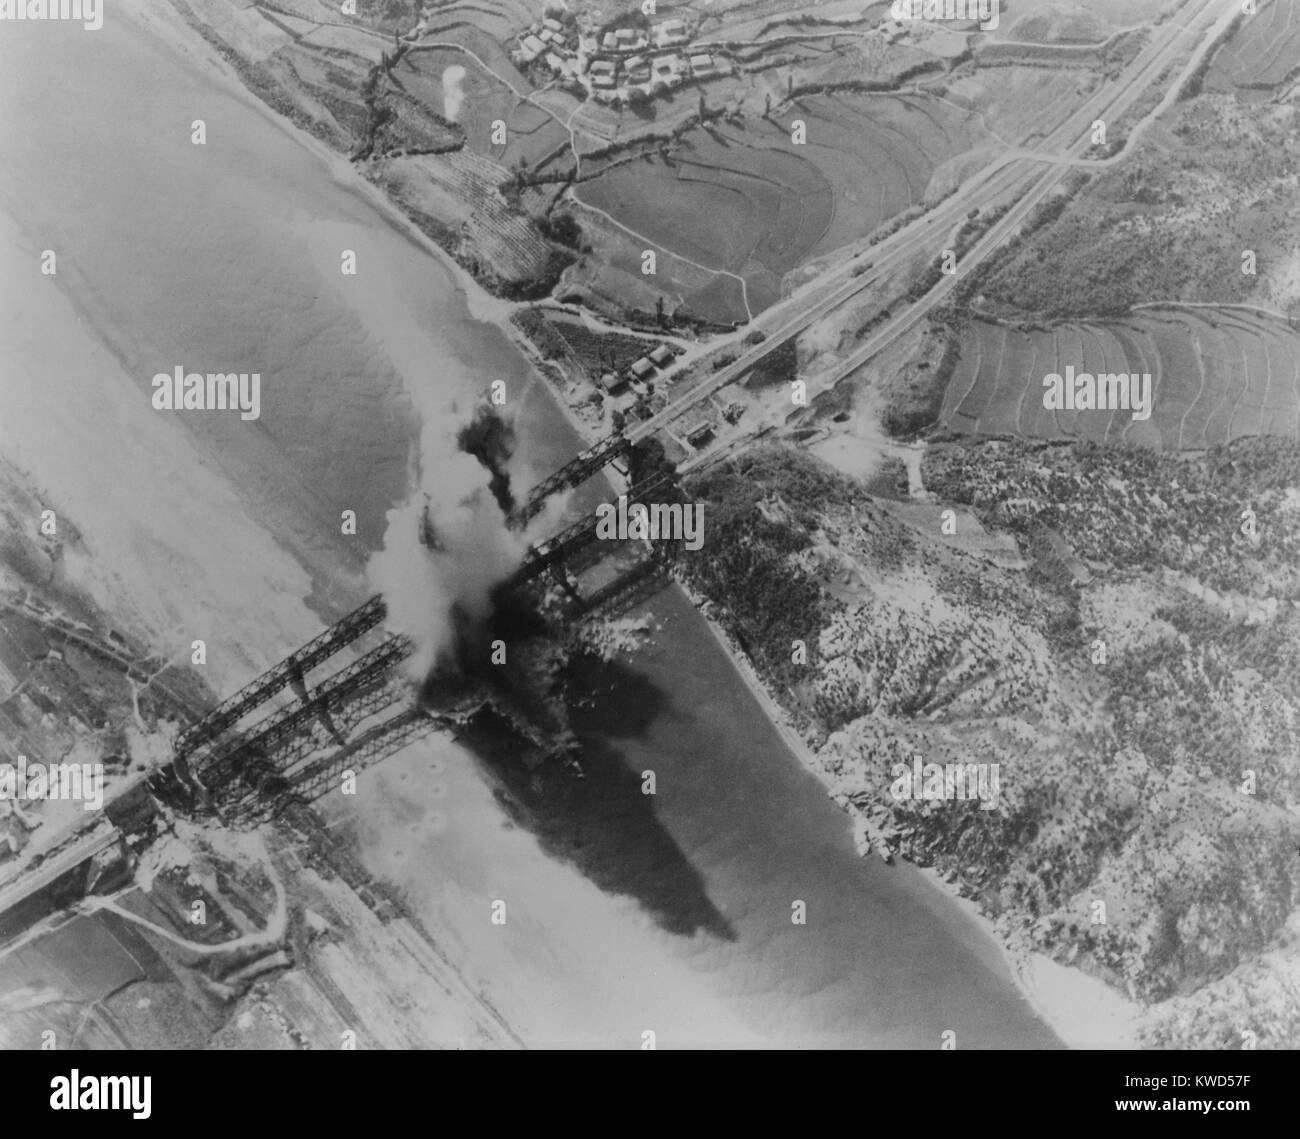 U.S. Bombing of Kum River bridges about 10 miles north of Taejon, Korea. Radio-controlled bombs were used for precision strikes, mostly for demolishing major bridges during the Korean War. Ca. July 1950. (BSLOC 2014 11 223) Stock Photo